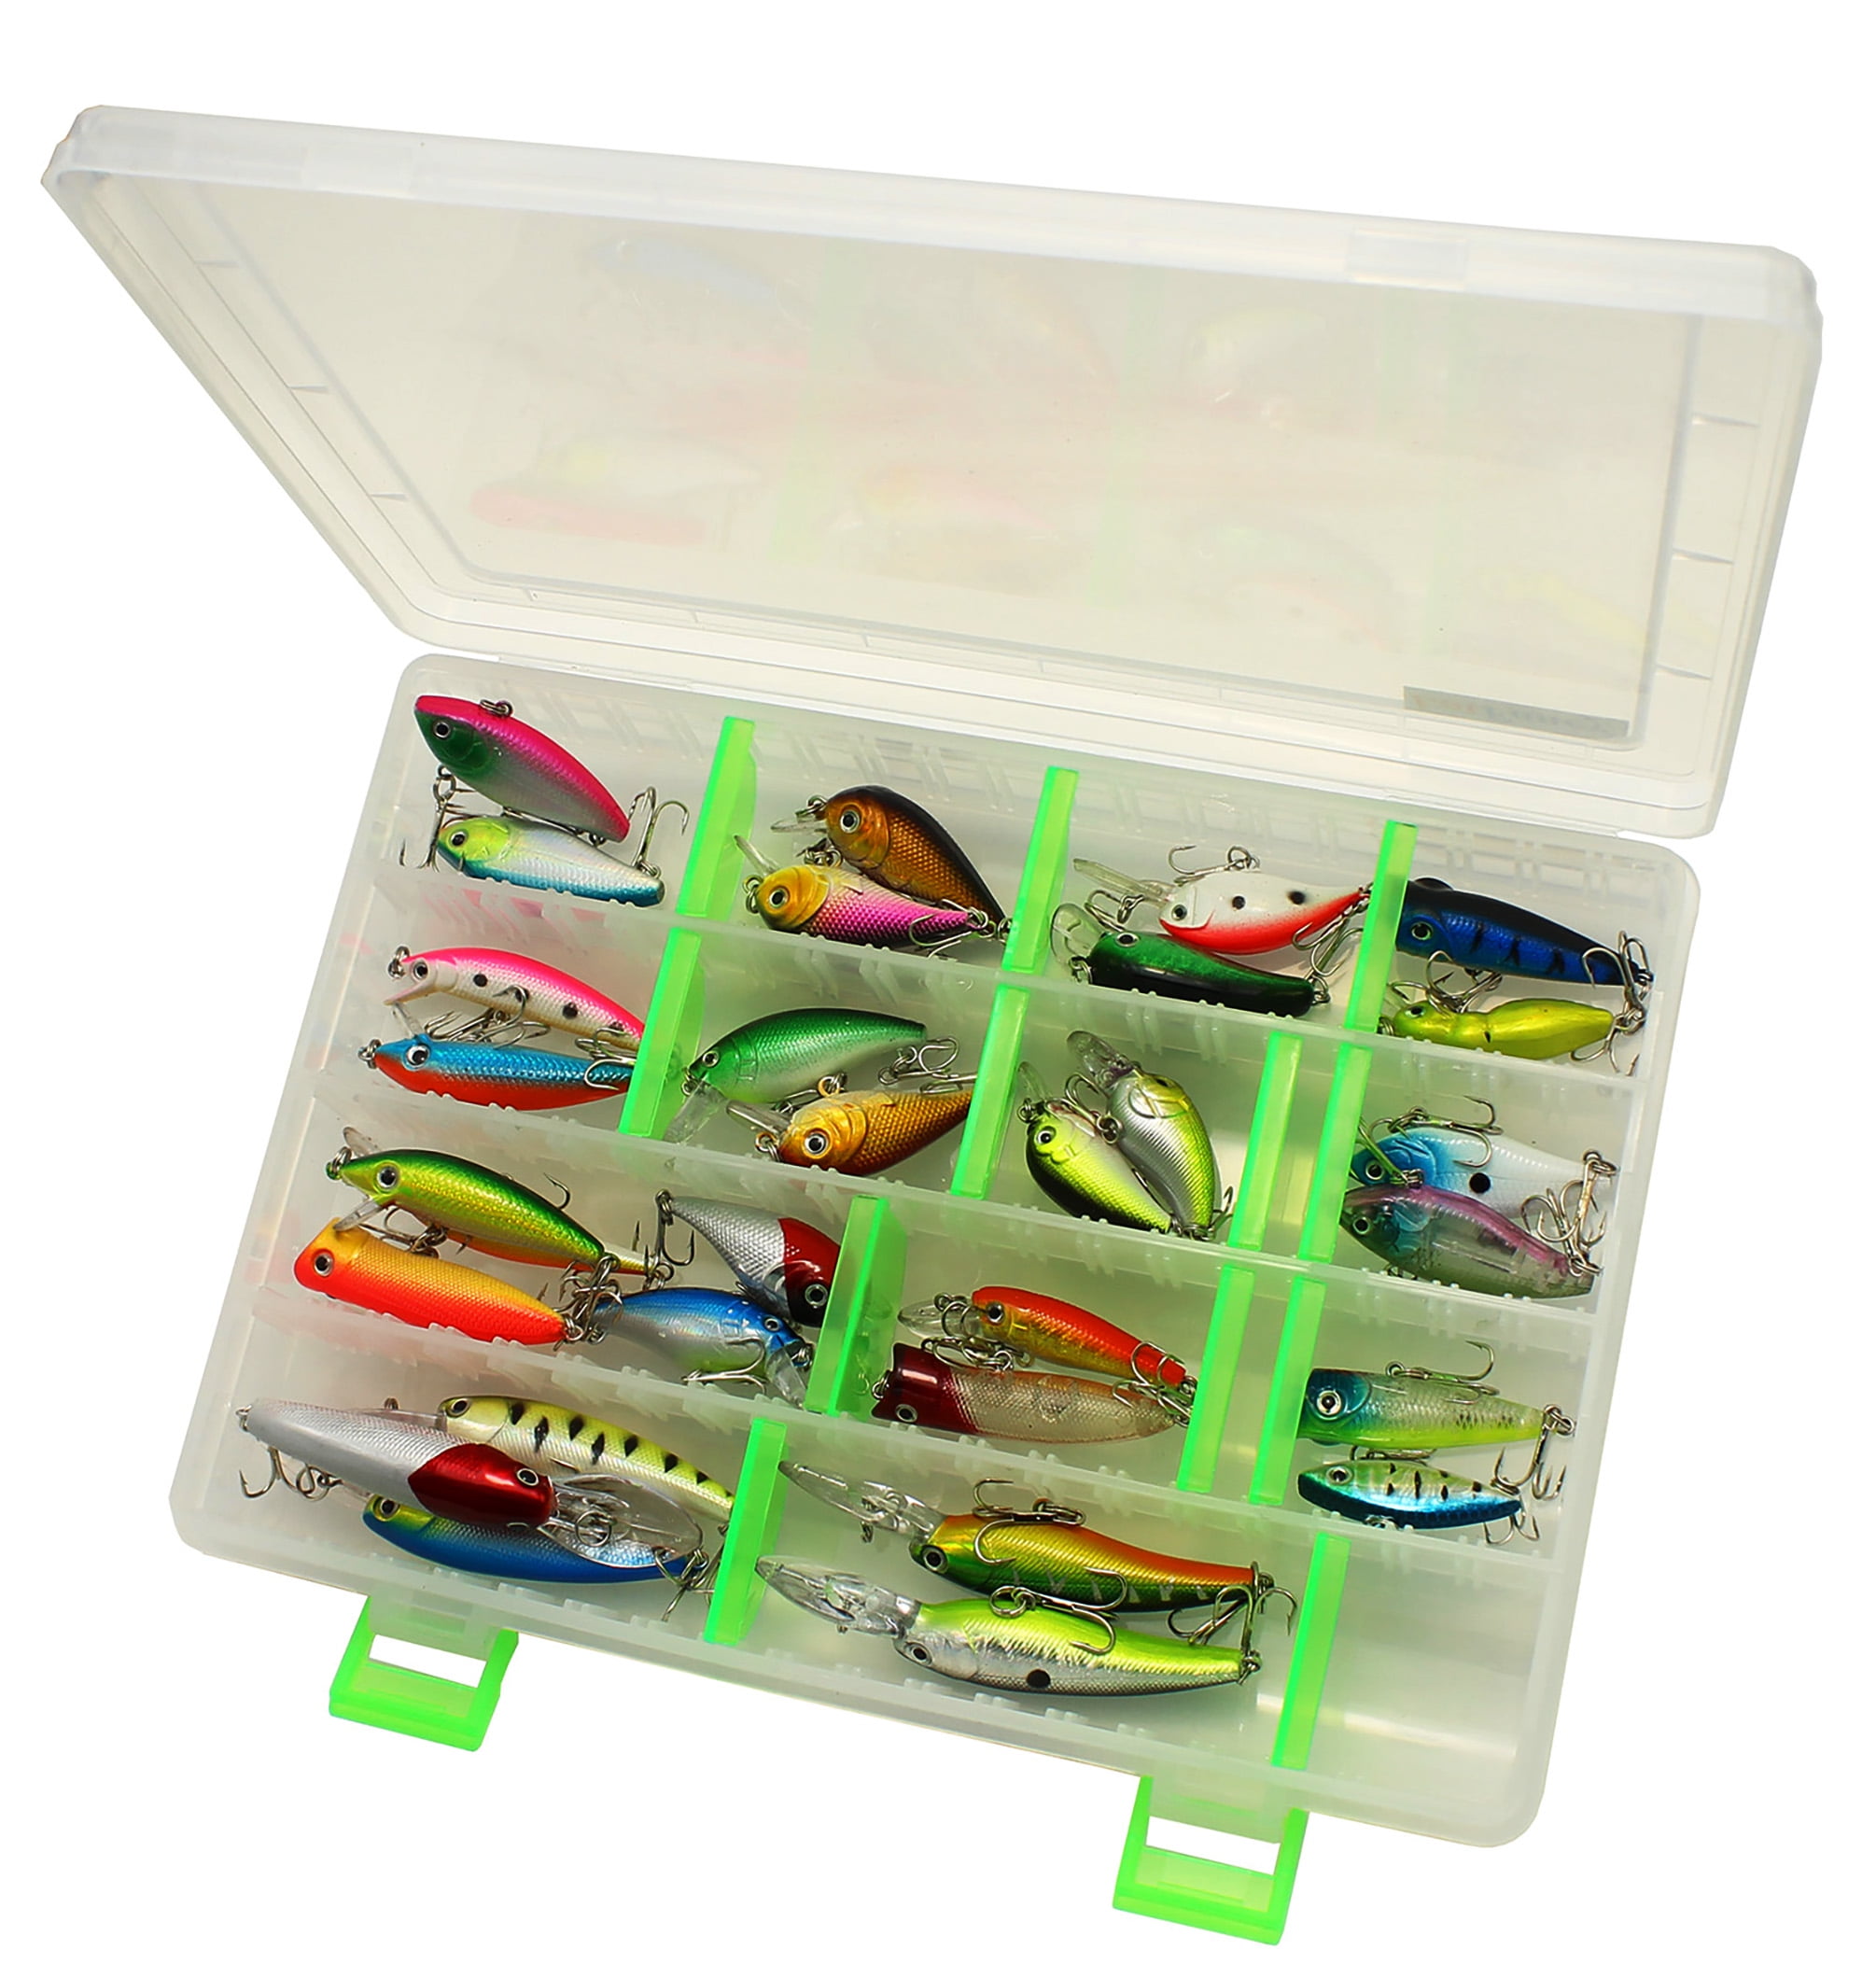 Spinnerbaits Holzsammlung Fishing Lure Kit Crankbaits Plastic Worms 106 PCS Fishing Lures Baits Tackle Mixed Including Hooks Tackle Box and More Fishing Gear Lures Kit Set #5 Topwater Lures